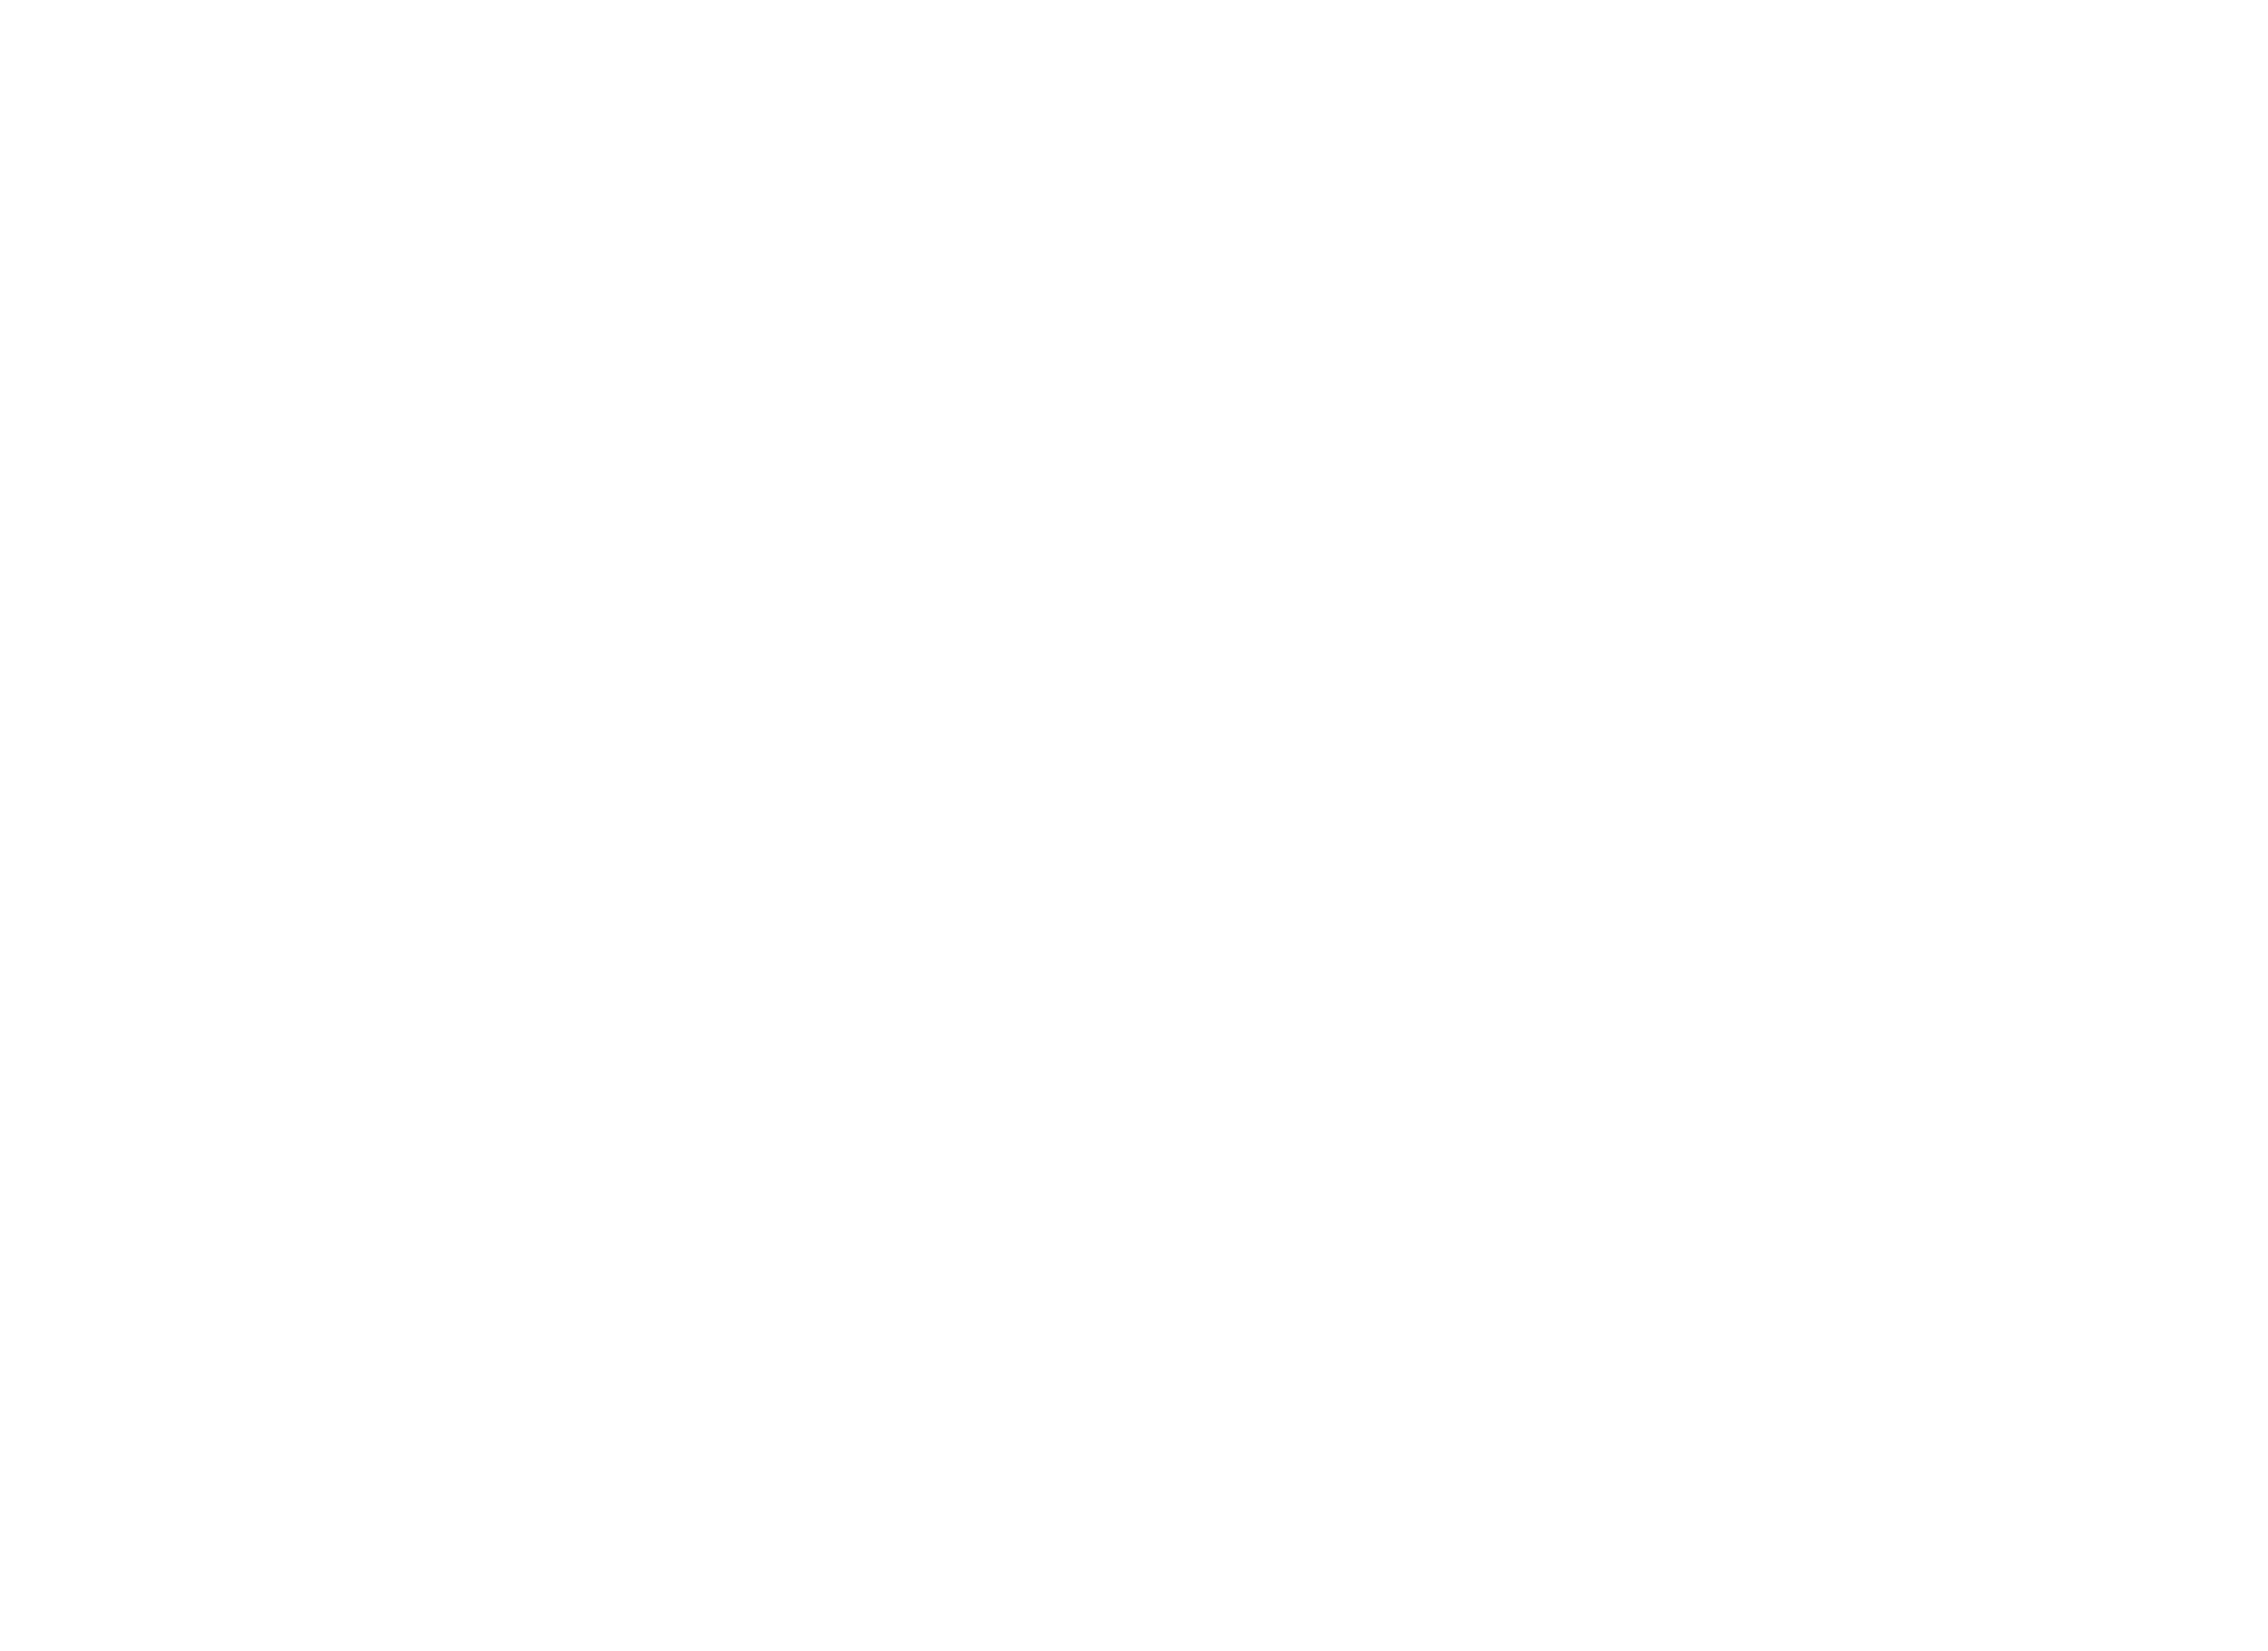 PMP MUSIC GROUP